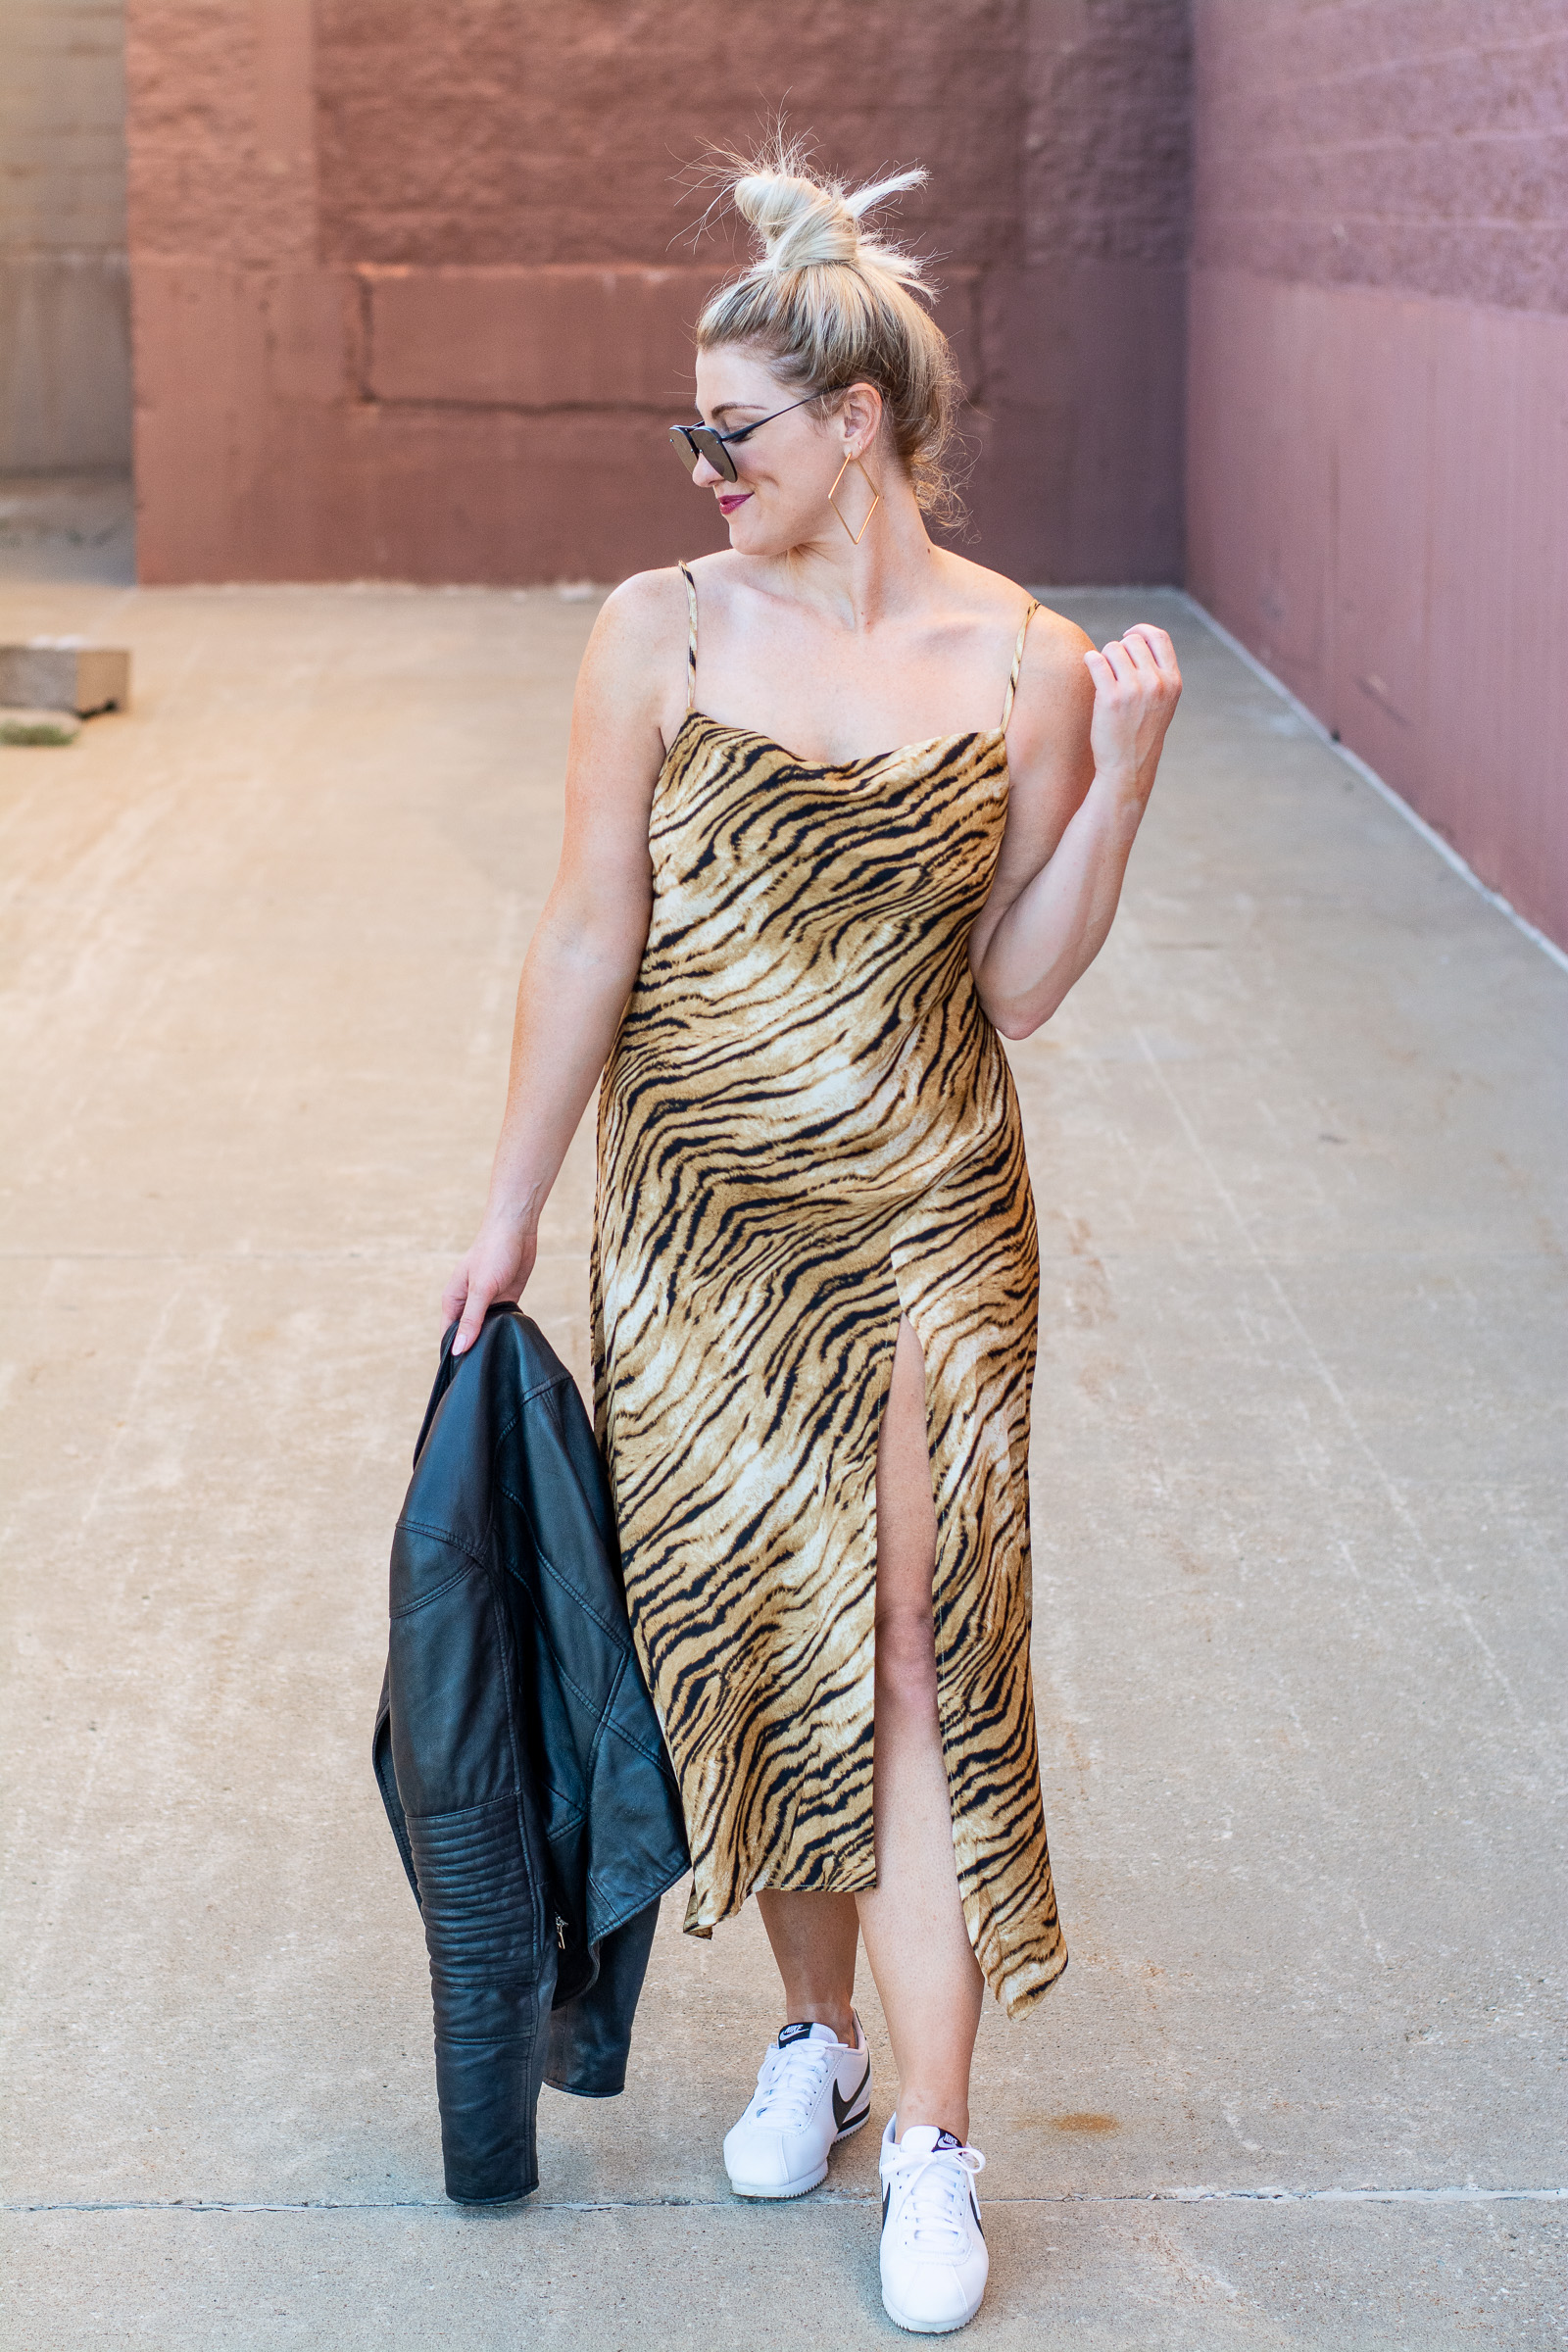 Transitional Outfit Idea: Tiger-striped Slip Dress + Sneakers. | LSR